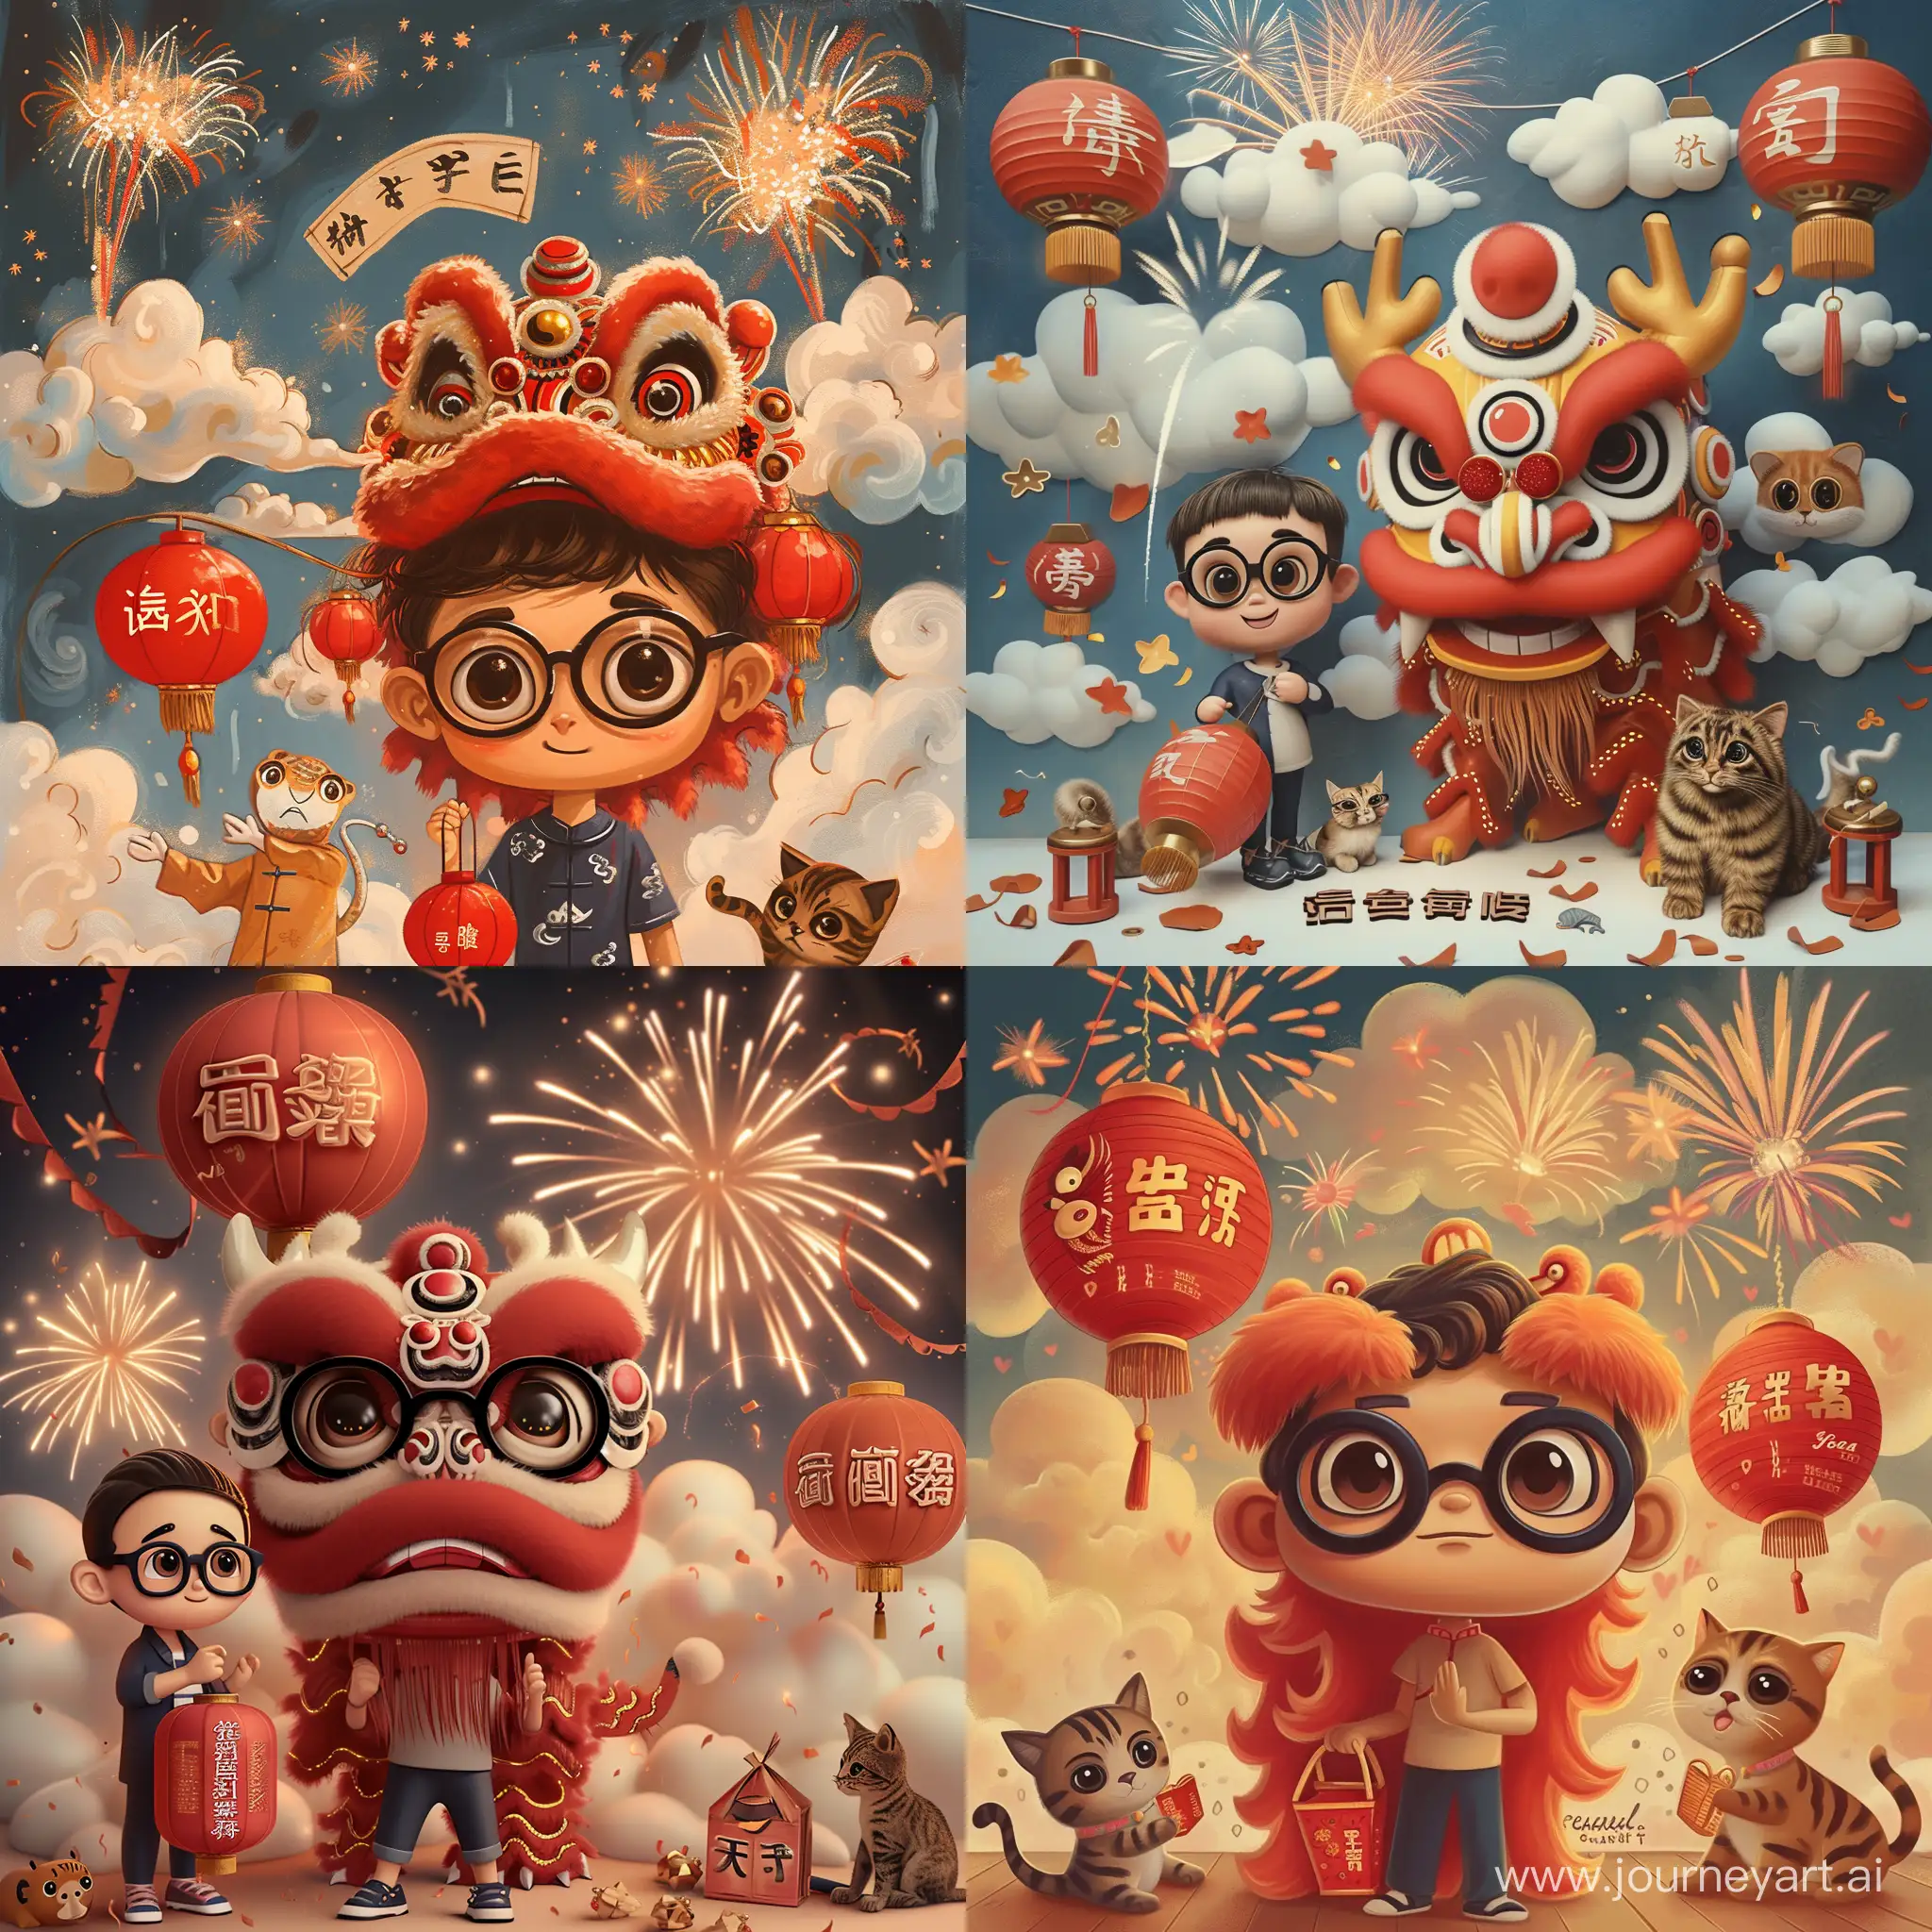 Festive-3D-New-Year-Painting-Year-of-the-Dragon-Celebration-with-Lion-Dance-and-Lanterns